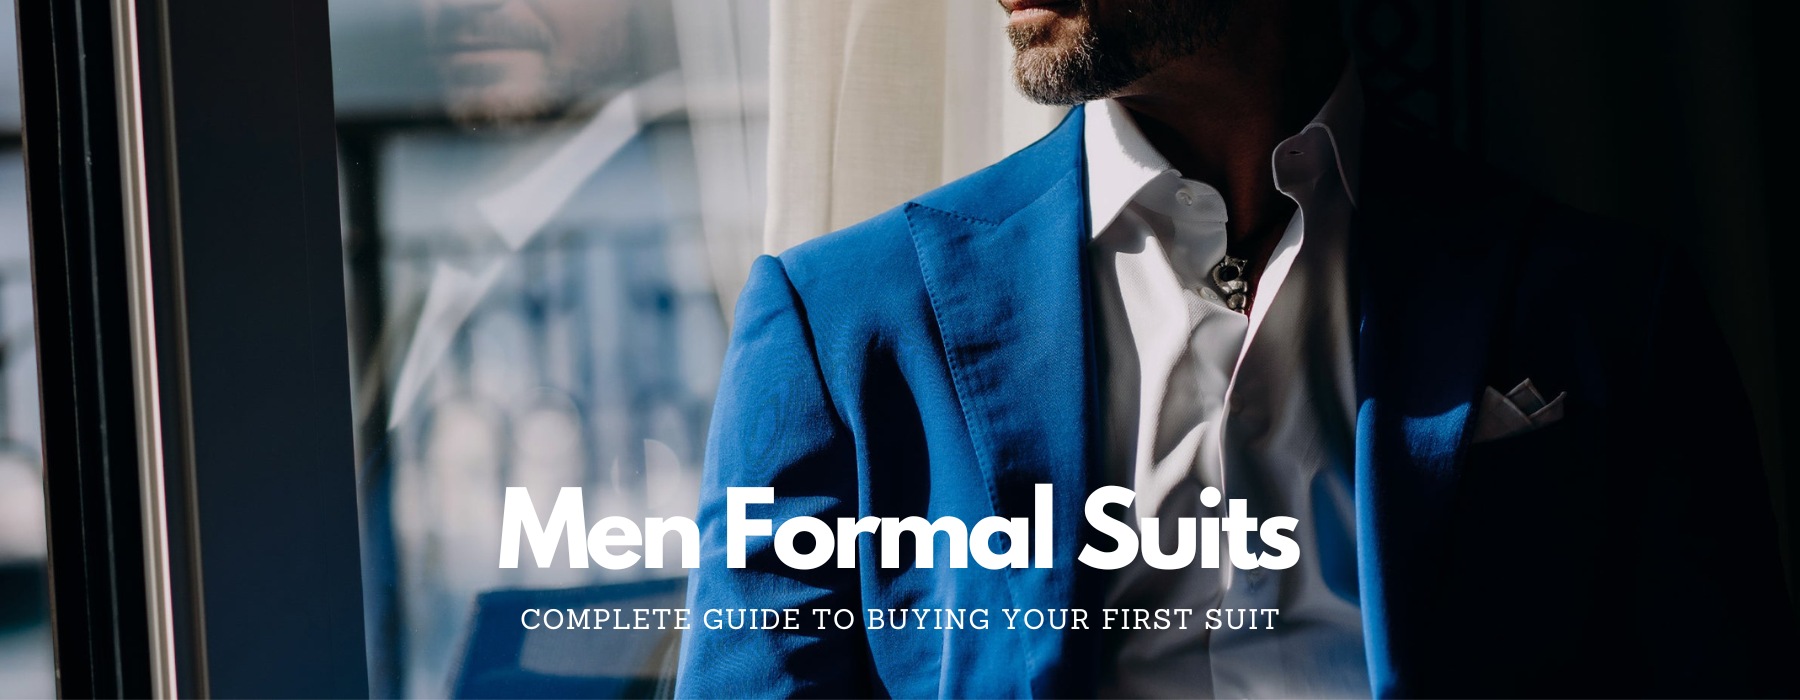 A Complete Guide to Buying Your First Suit: Tips for Men in the UK - Upperclass Fashions 